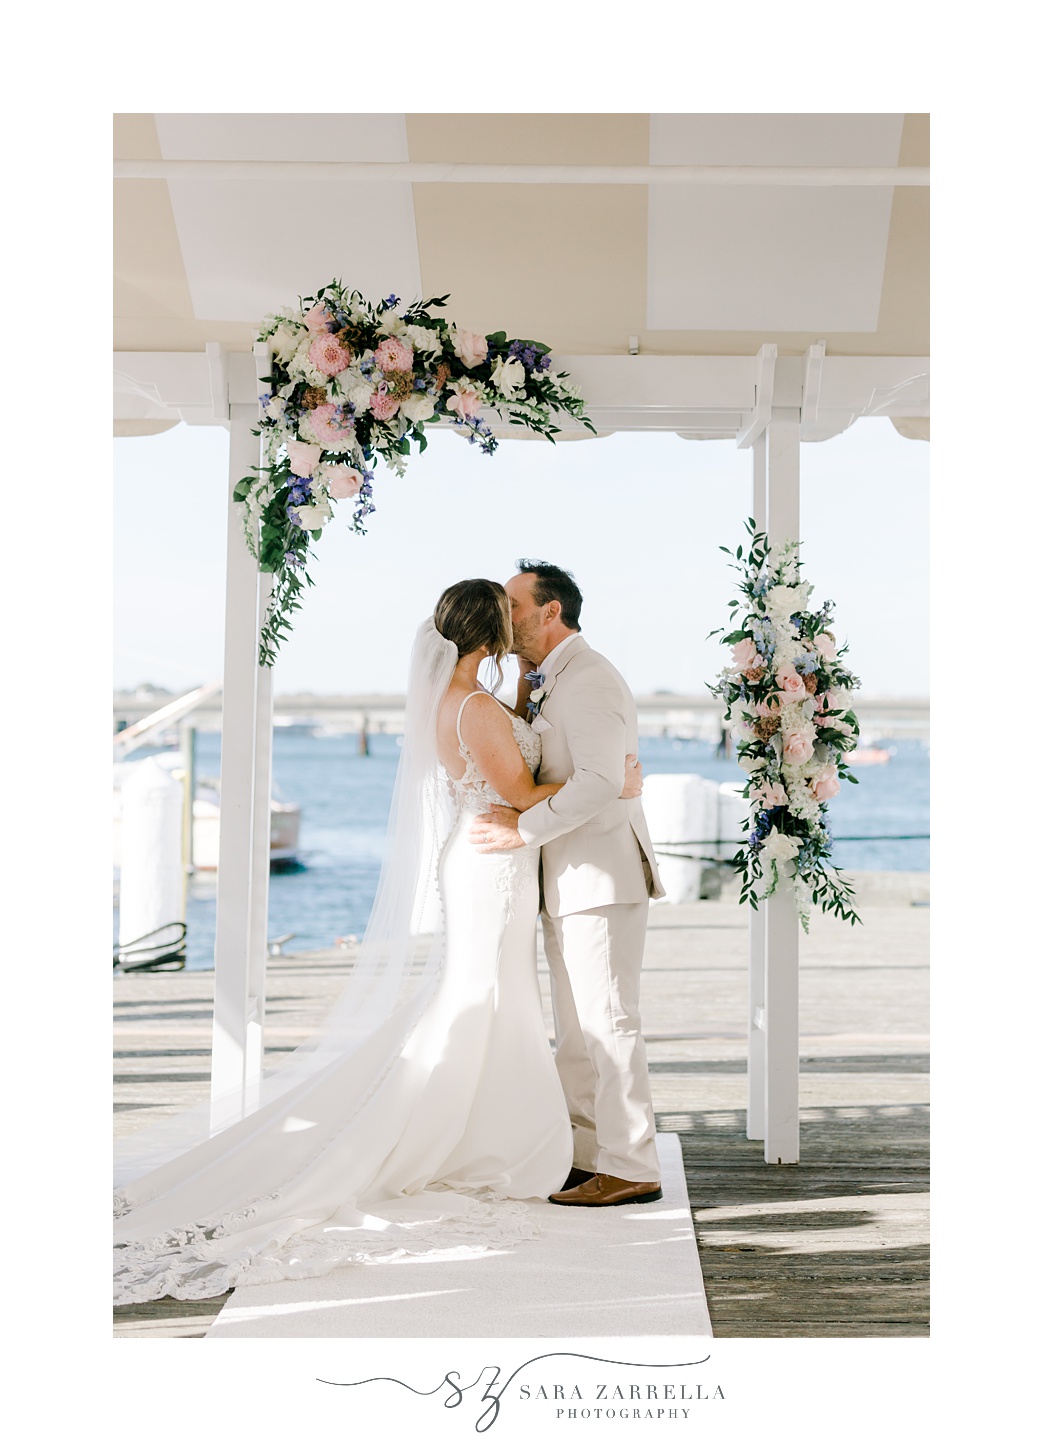 newlyweds kiss under white arbor with pink flowers during waterfront wedding ceremony at Regatta Place